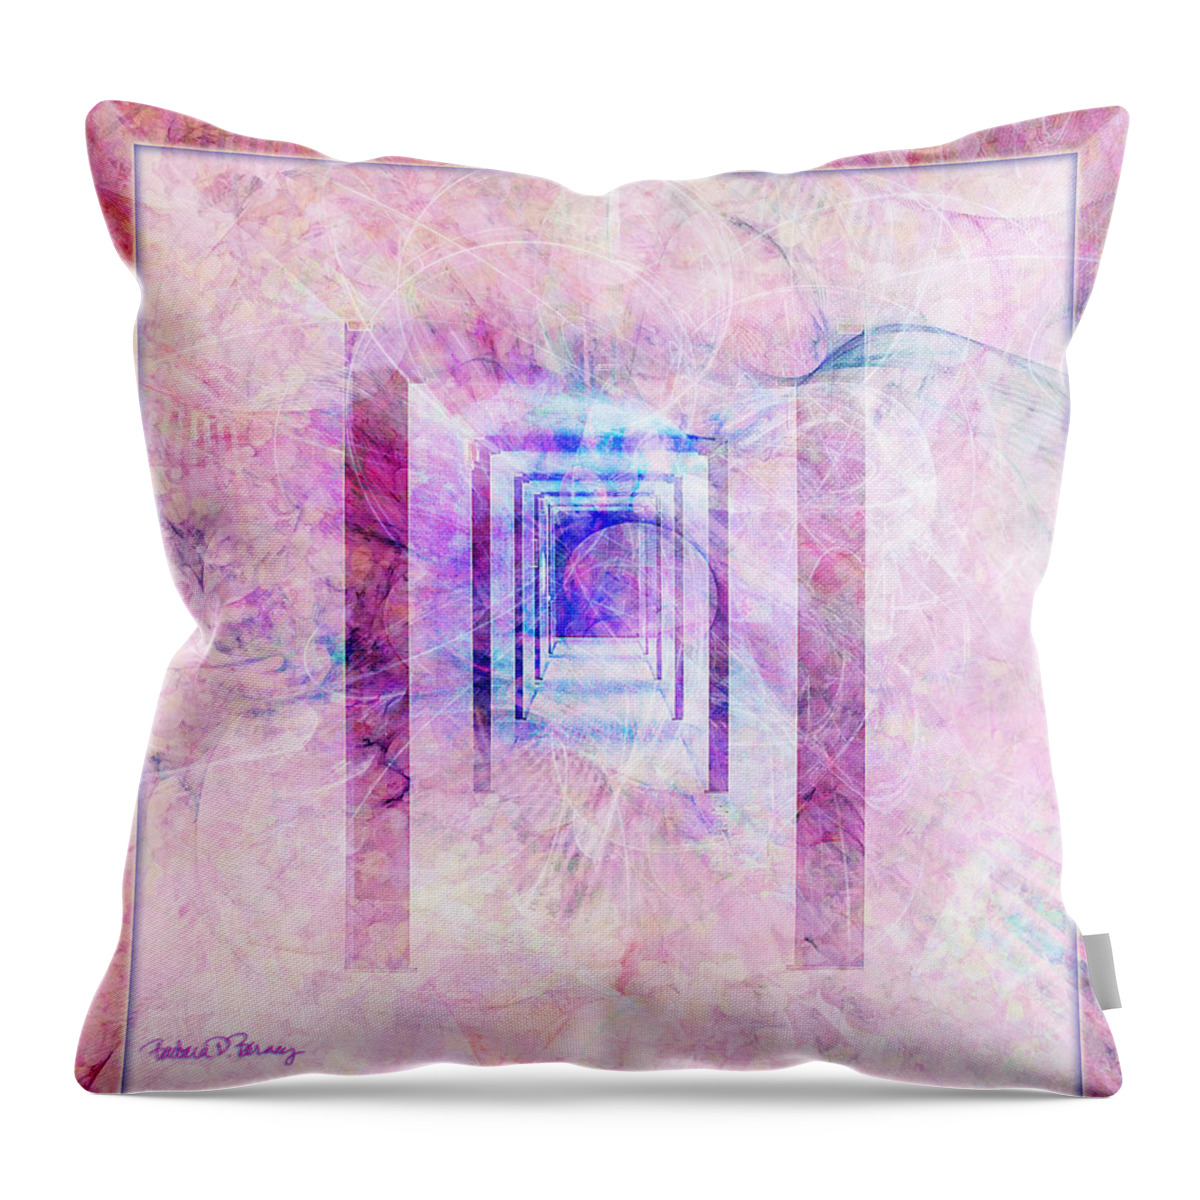 Pink Throw Pillow featuring the digital art Down the Hall by Barbara Berney